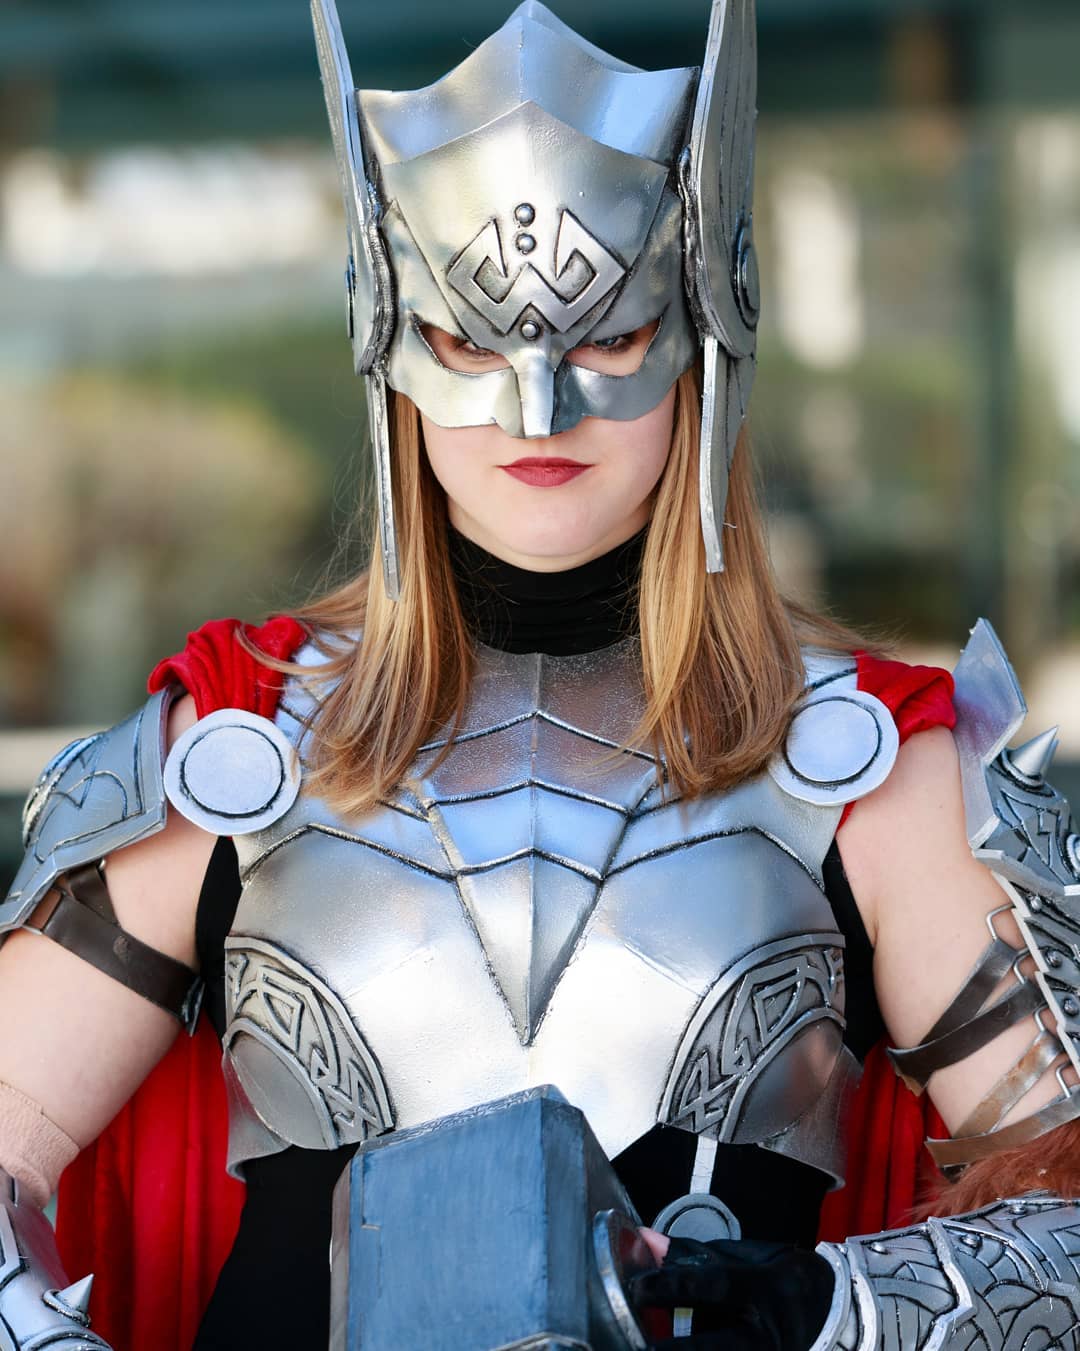 This isn’t Thor but she’s Worthy and has royan warriors type armor.
#bmorecomiccon #avengers